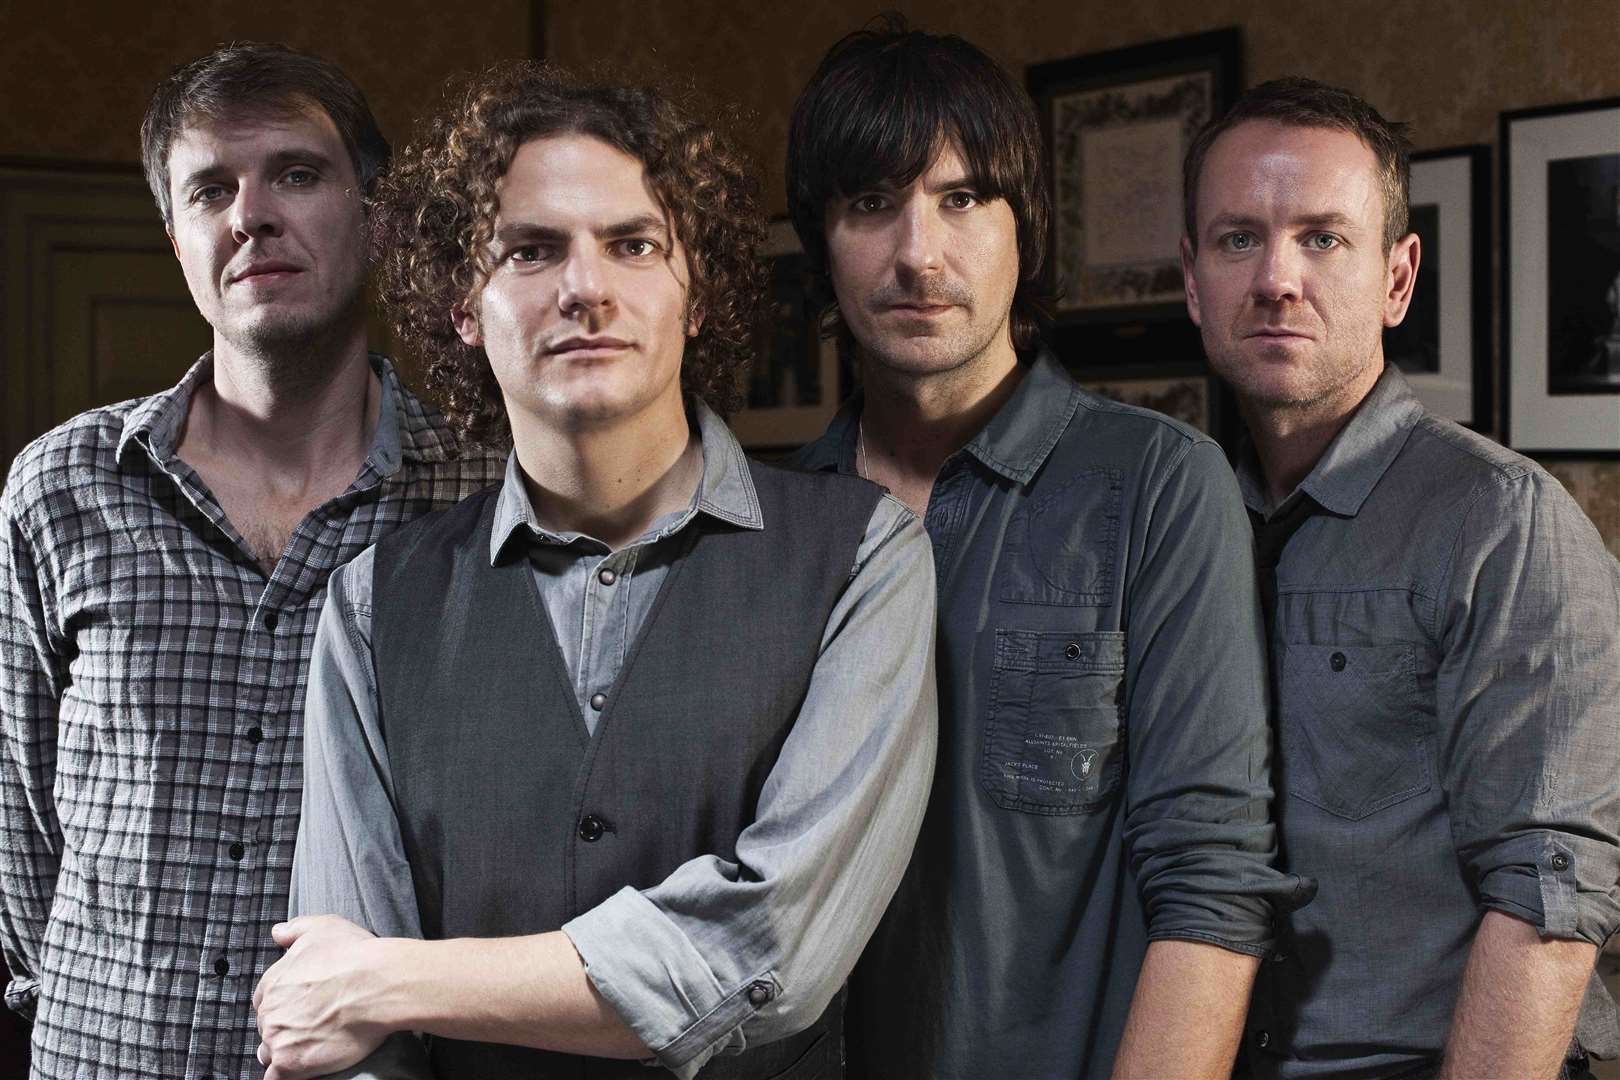 Toploader will be opening this year’s Ashford Create Music Festival